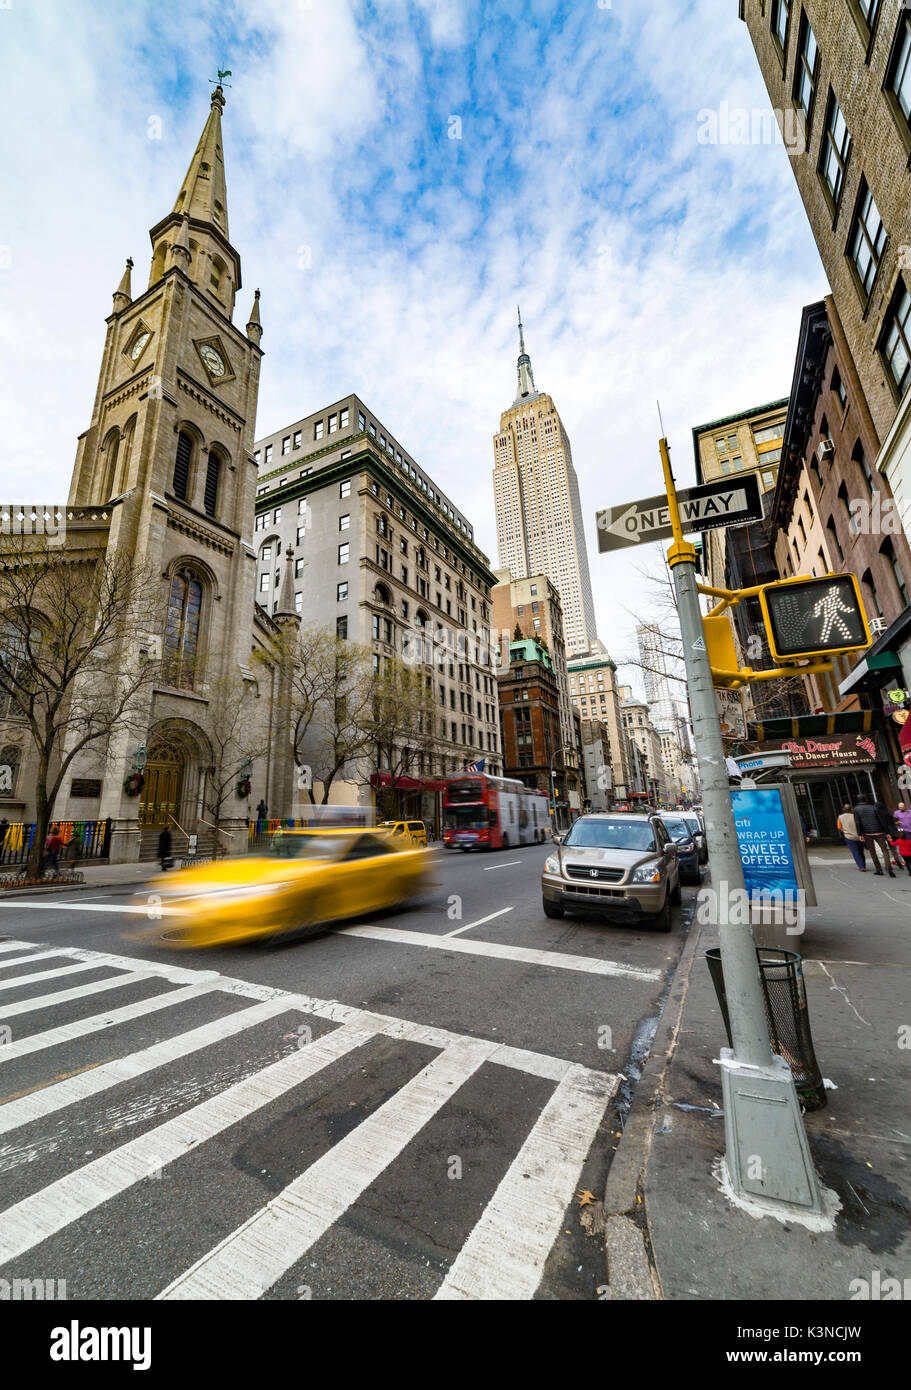 The Marble Church and the Empire State Building from the 5th avenue (Midtown, Manhattan, New York City, New York, United States of America) Stock Photo